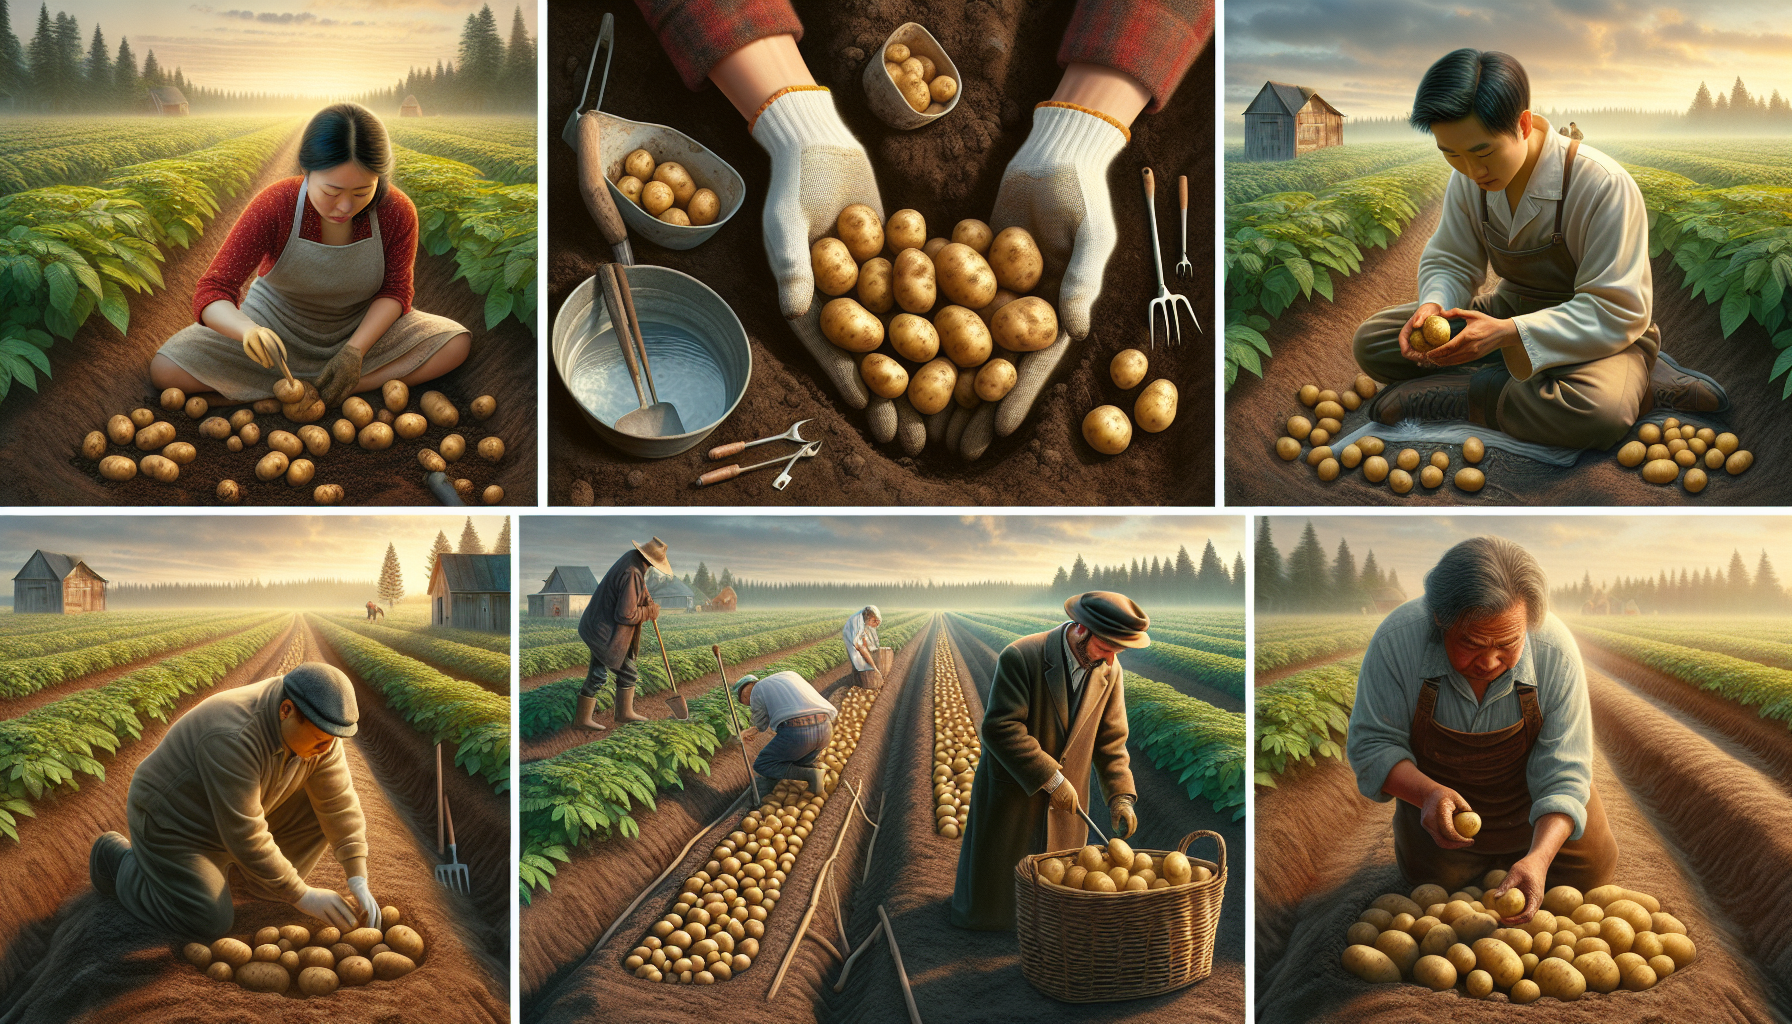 Perfect timing and techniques for harvesting new potatoes